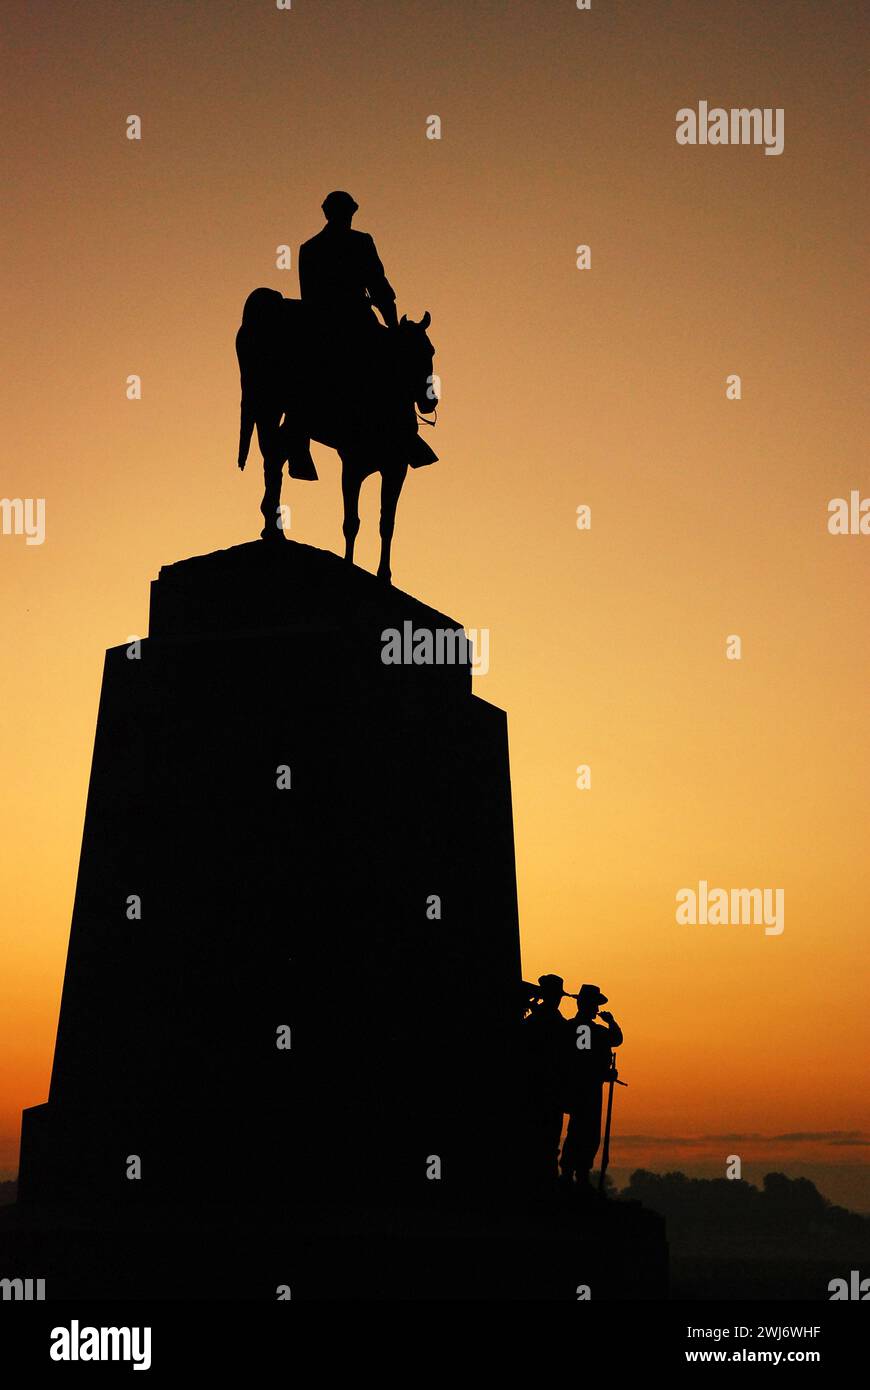 A sculpture of Confarreate General Robert E Lee on horseback stands in silhouette against the sunrise sky Stock Photo